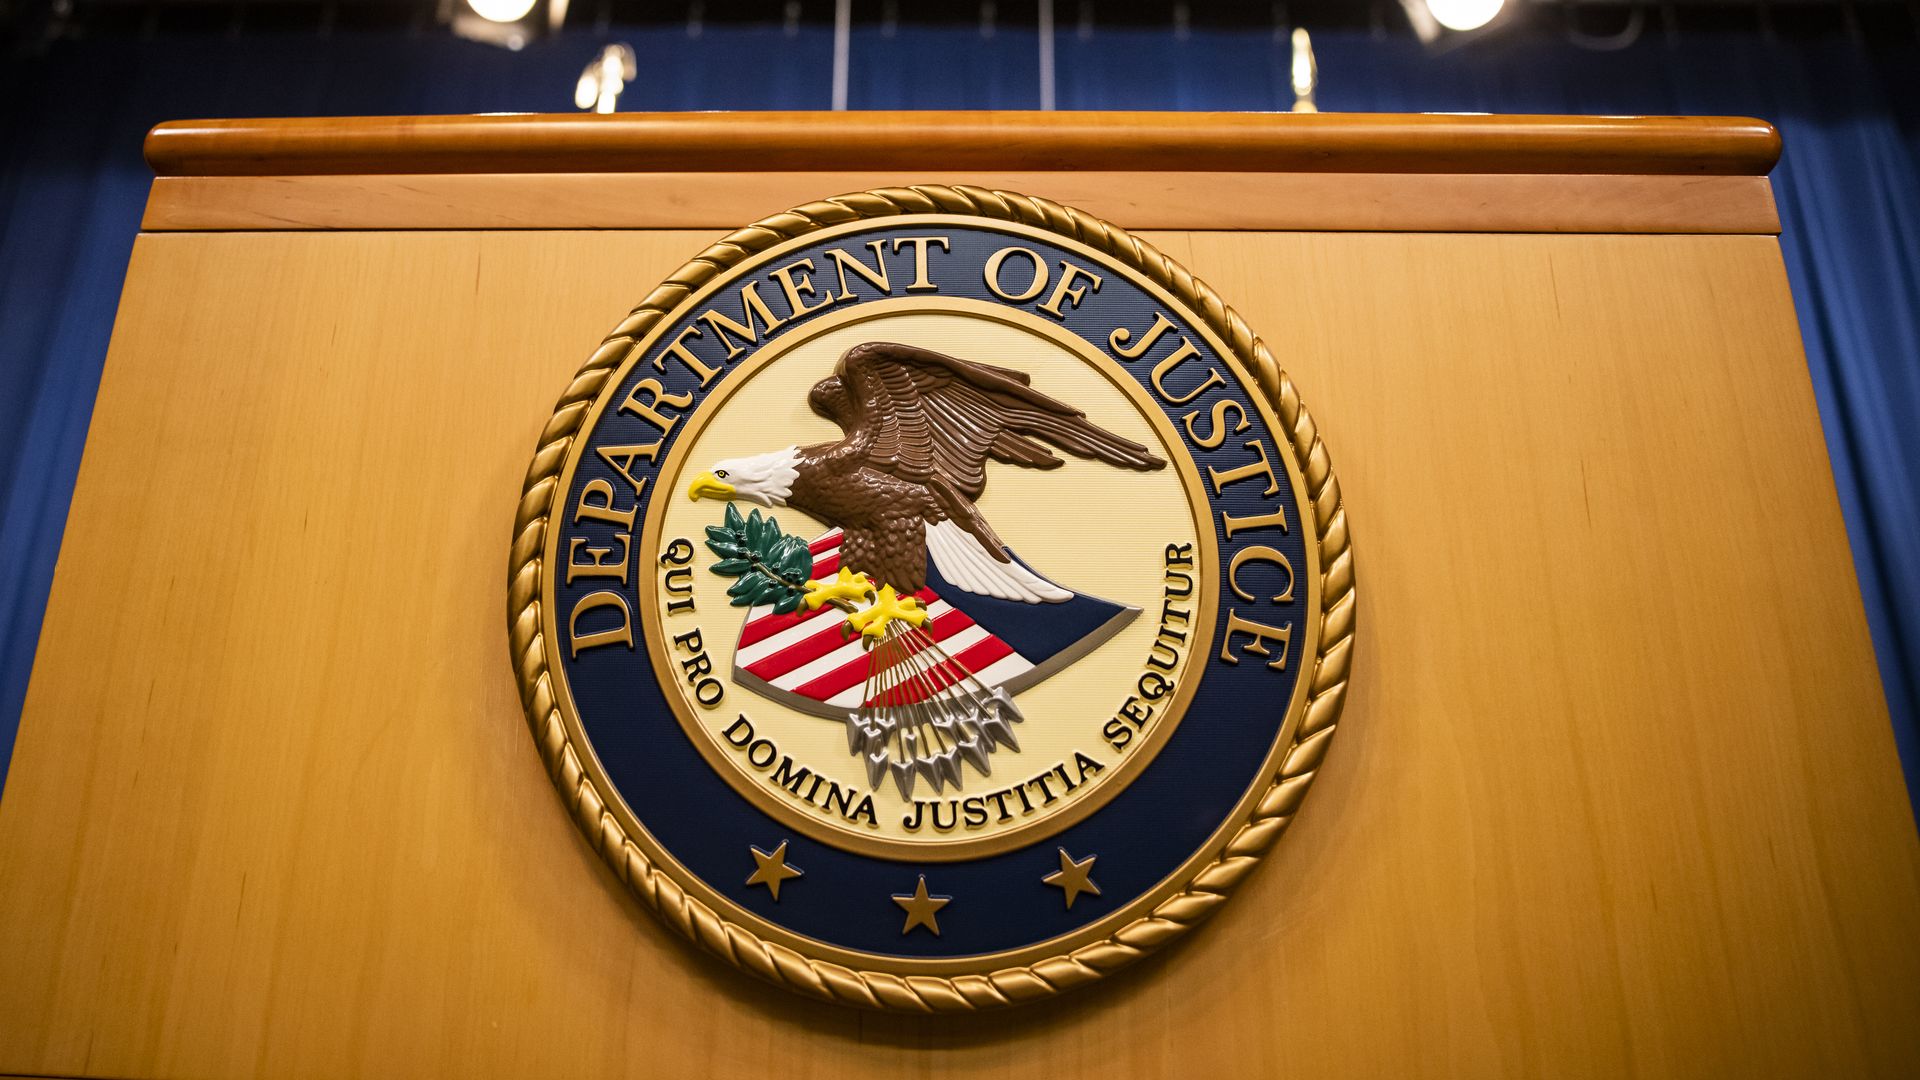 The Department of Justice Seal 